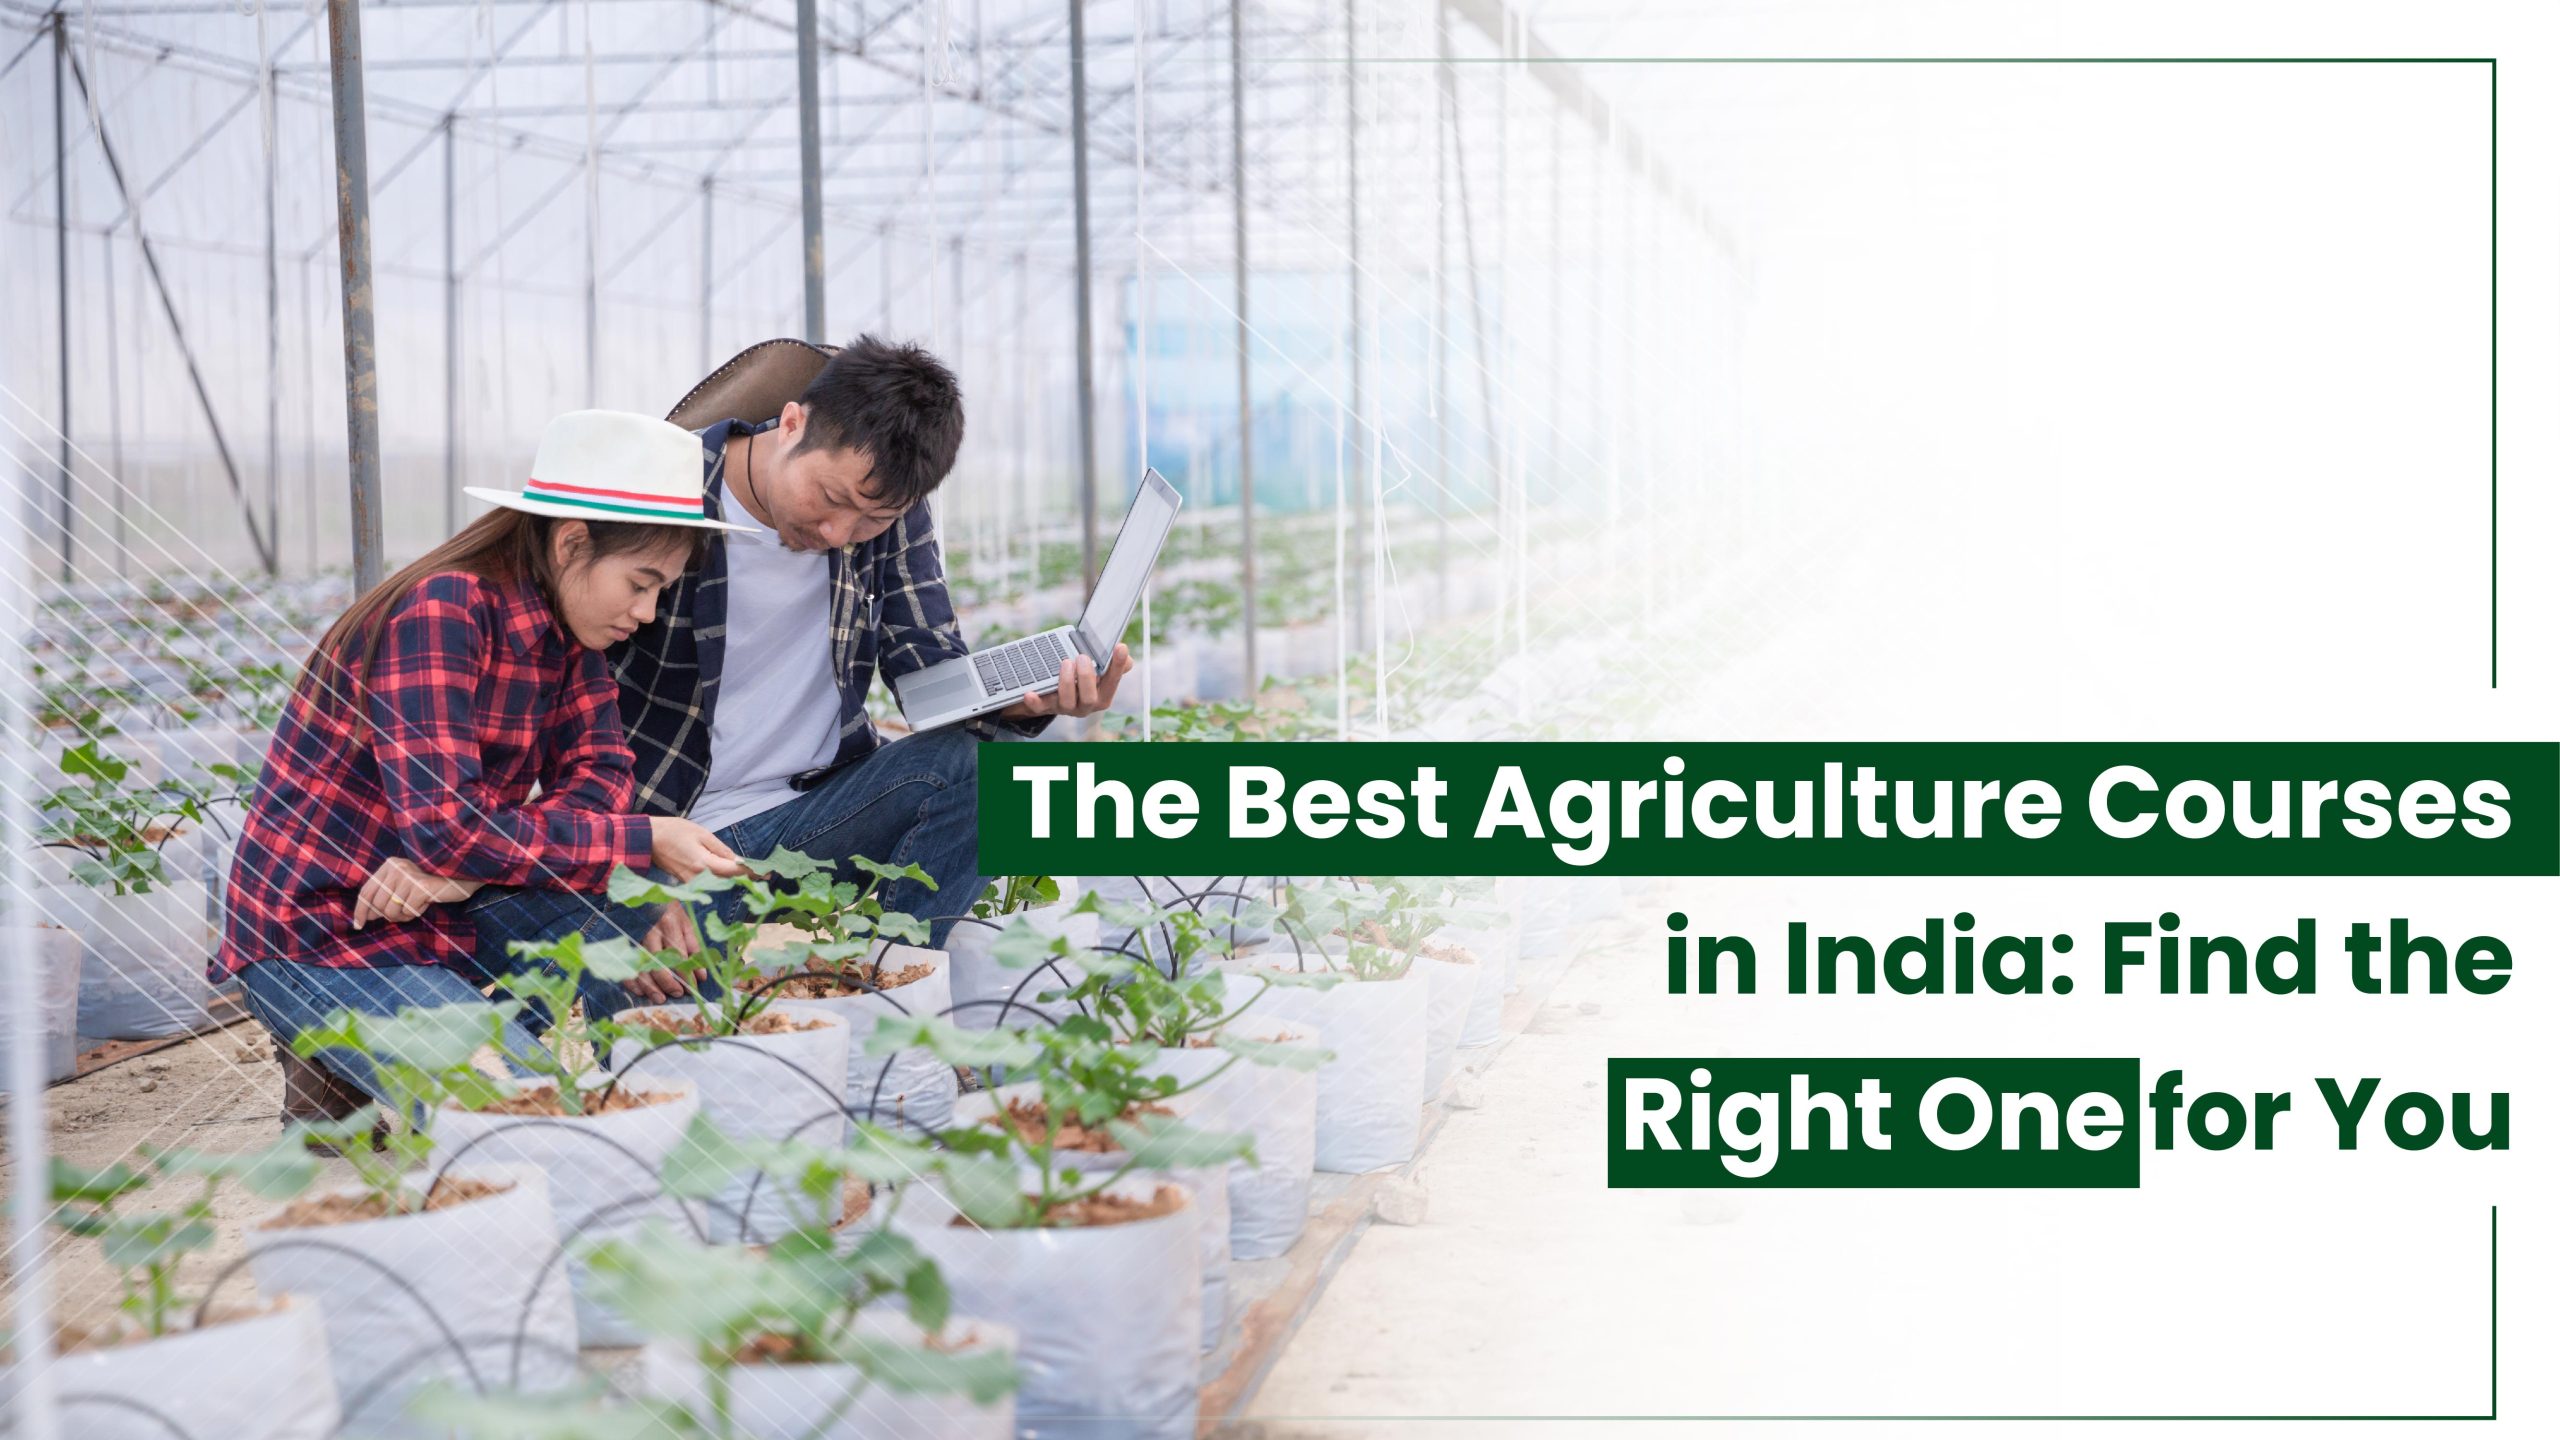 THE BEST AGRICULTURE COURSES IN INDIA: FIND THE RIGHT ONE FOR YOU